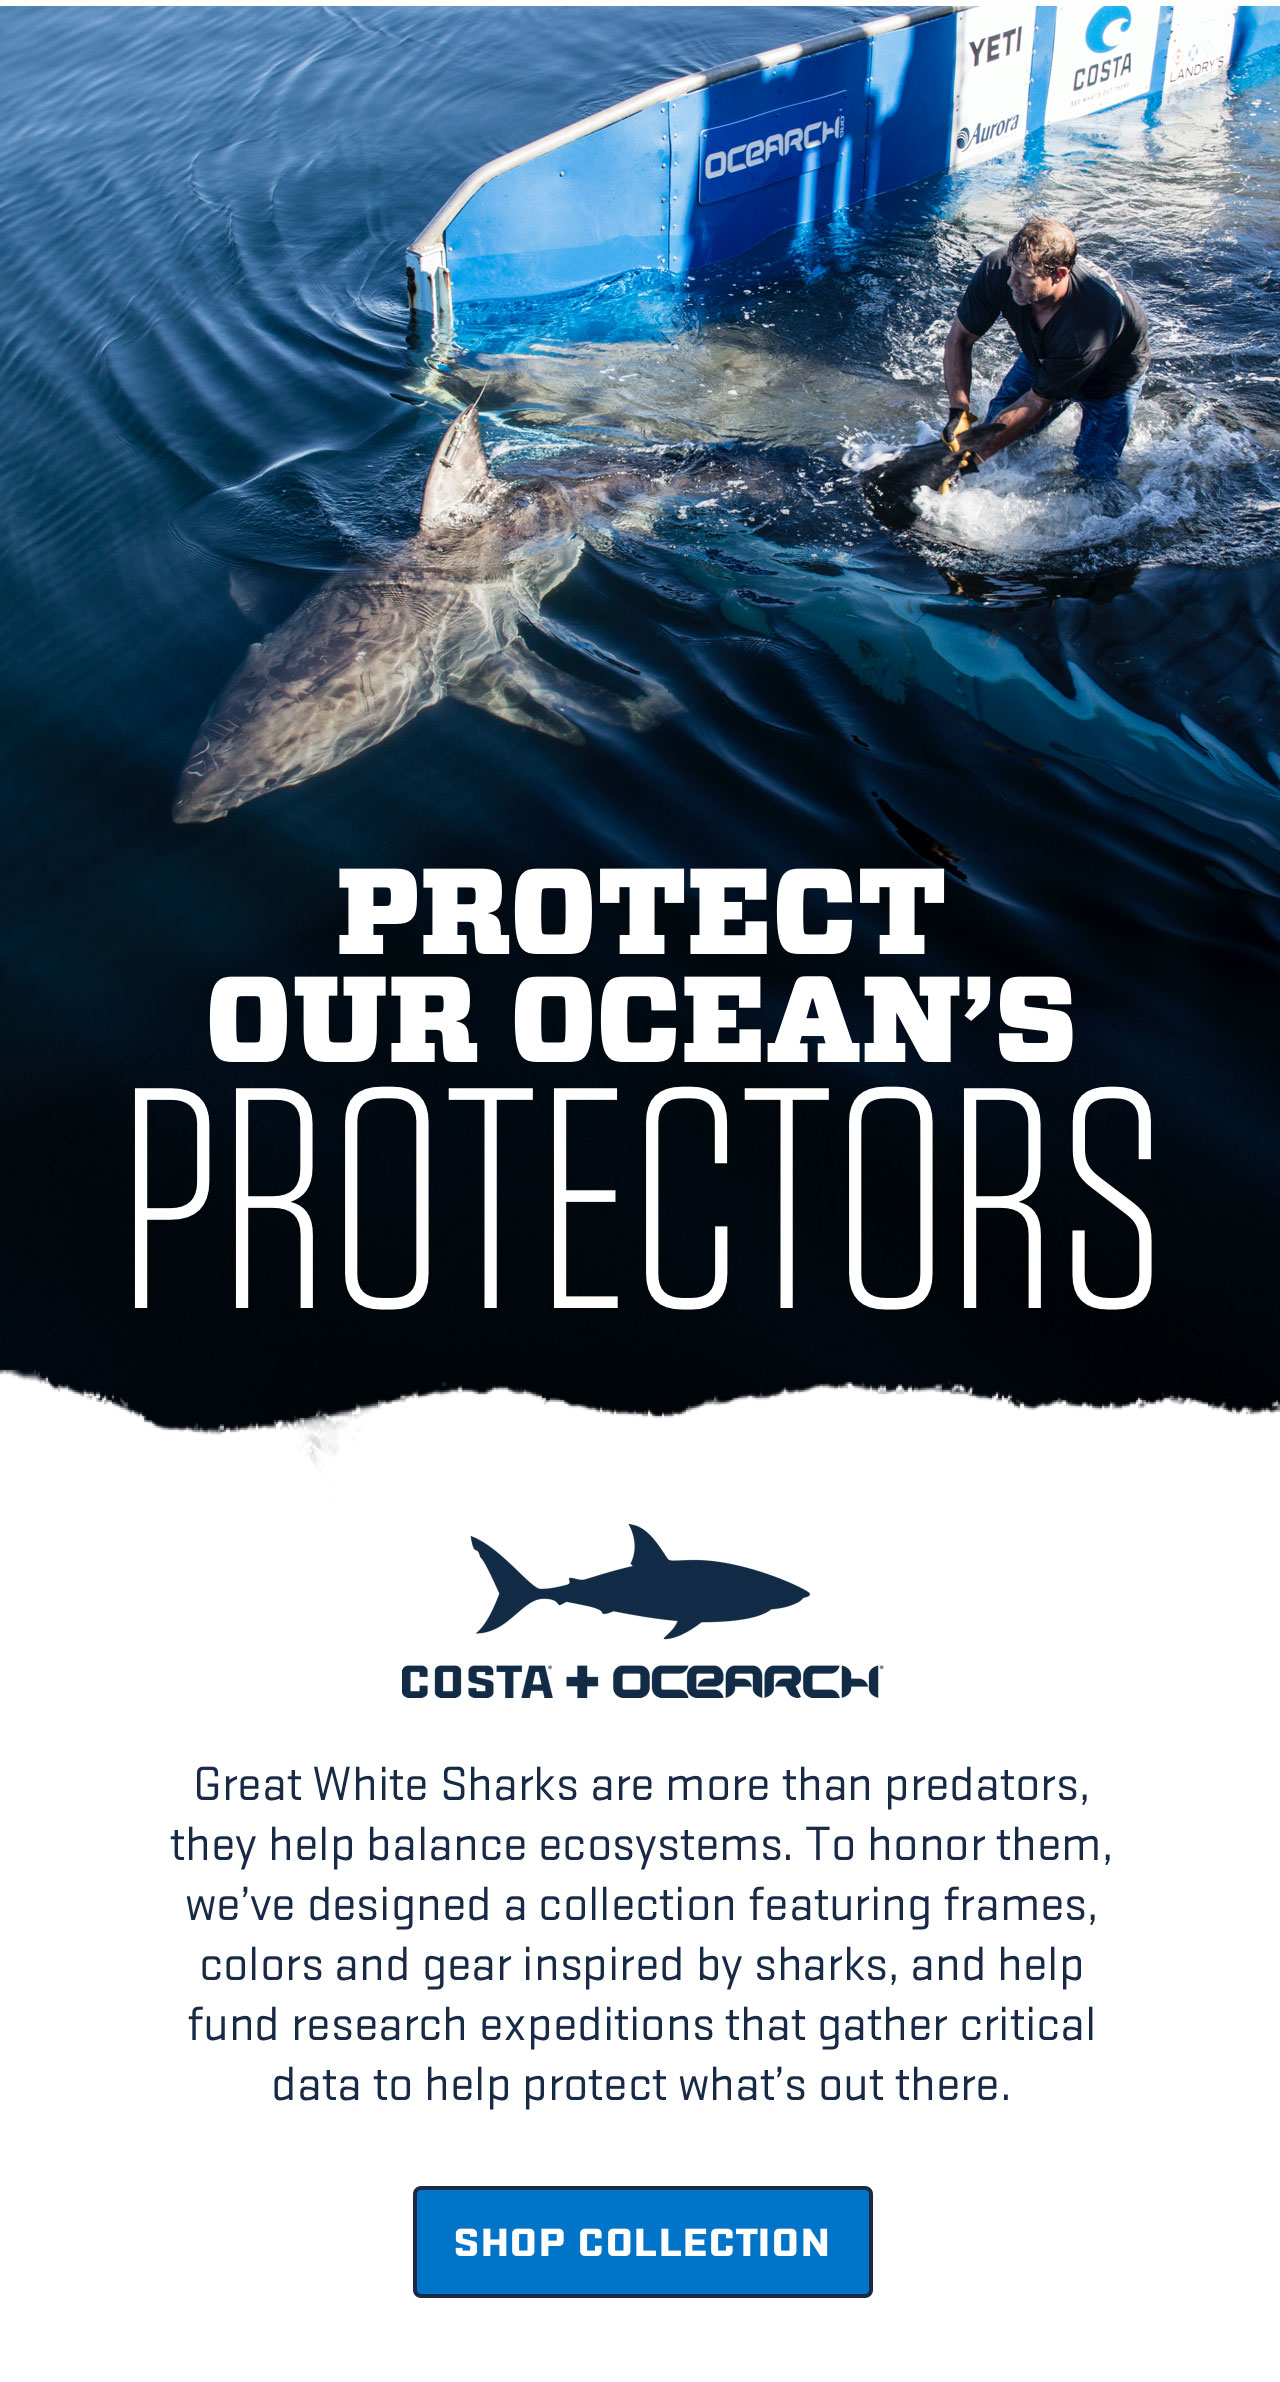 

Protect
our ocean''s
protectors

Costa + Ocearch

Great White Sharks are more than predators, they help balance ecosystems. To honor them, we've designed a collection featuring frames, colors and gear inspired by sharks, and help fund research expeditions that gather critical data to help protect what's out there.

[ SHOP COLLECTION ]

									